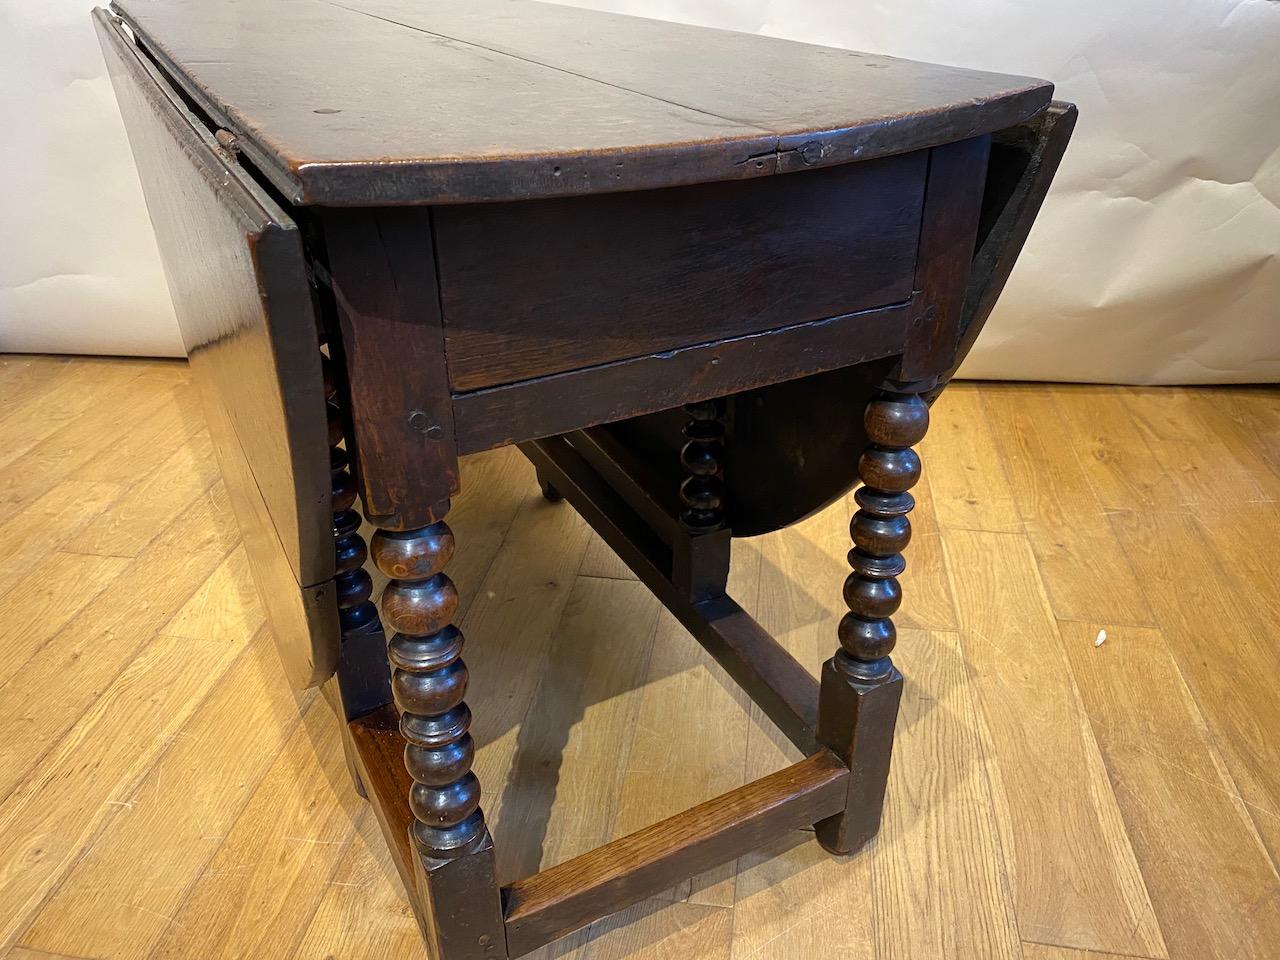 William and Mary Gate Leg Table